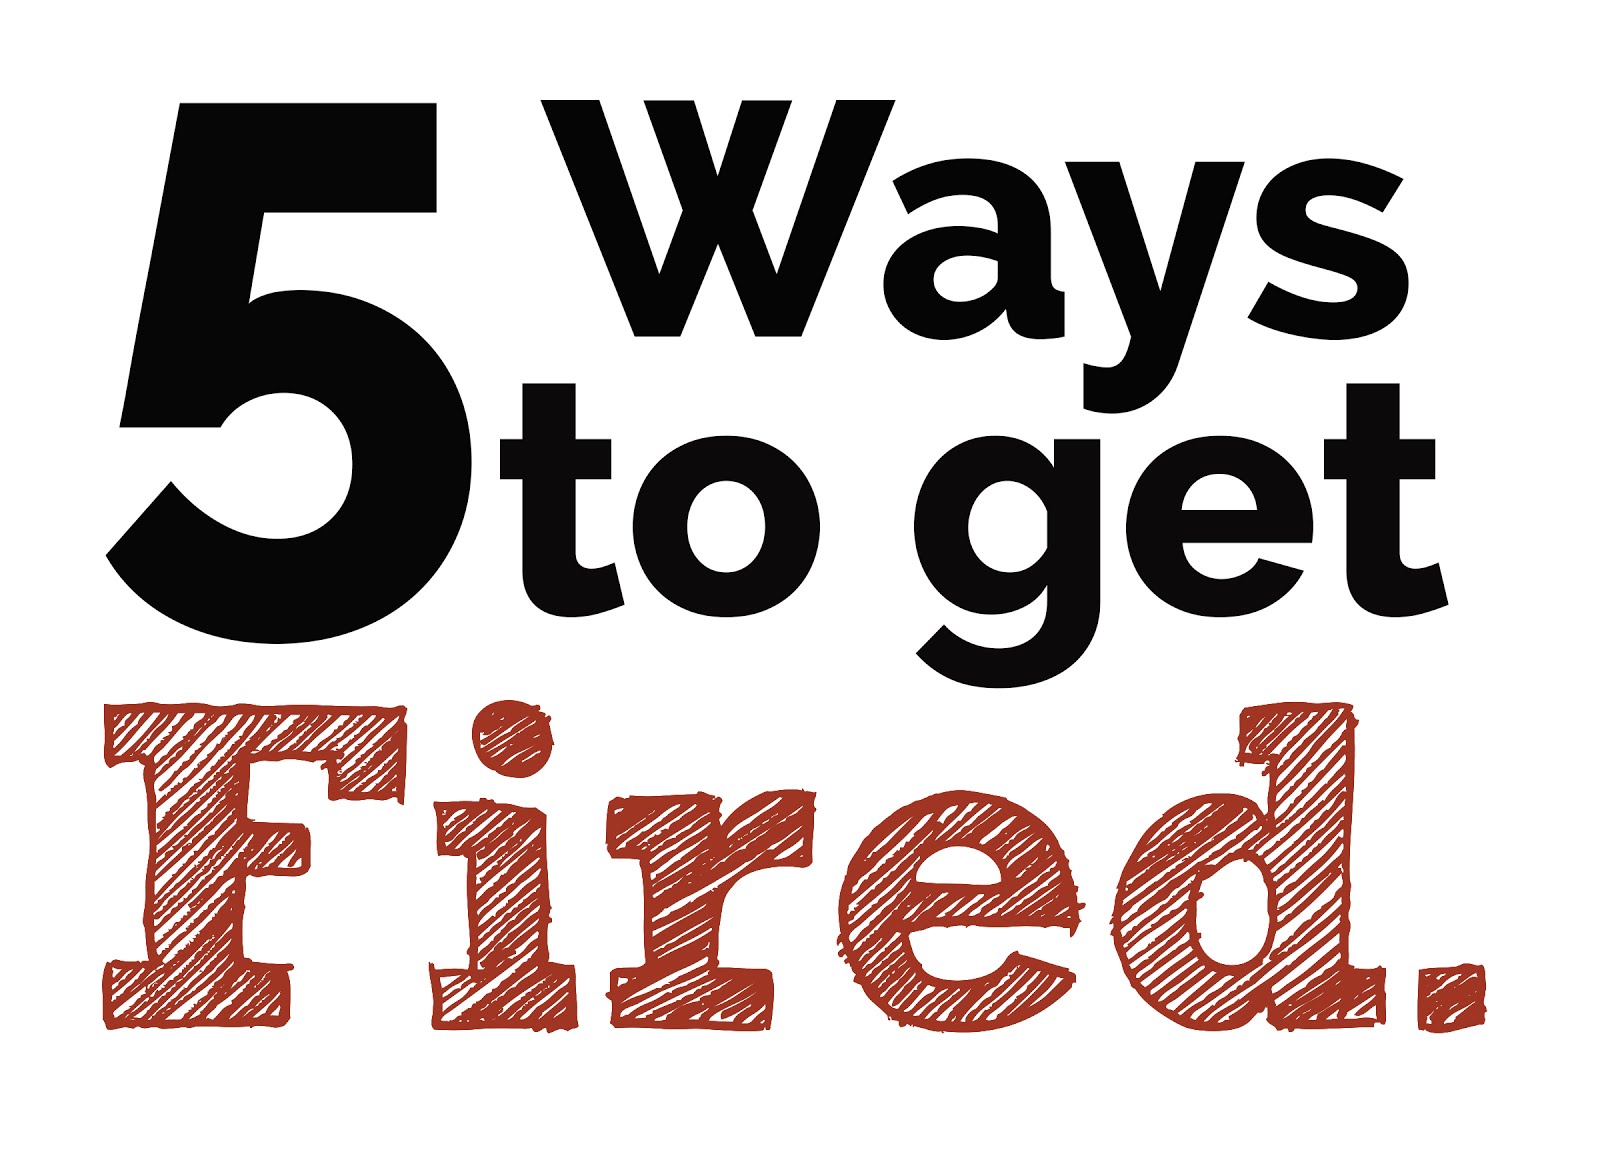 Ways to get fired